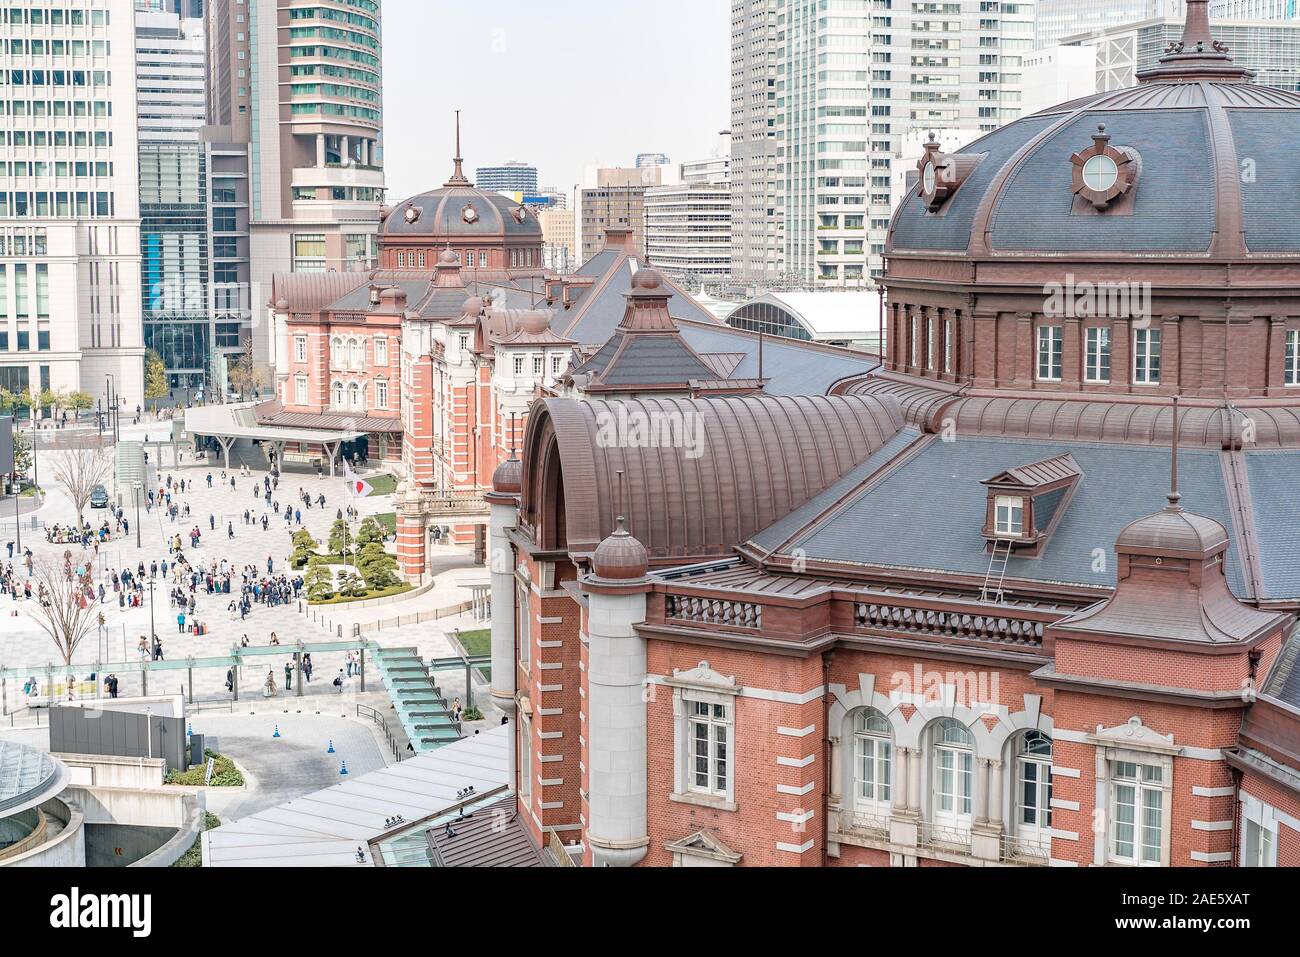 TOKYO, JAPAN - March 25 2019: Tokyo Station in Tokyo, Japan. Open in 1914, a major a railway station near the Imperial Palace grounds and Ginza commer Stock Photo